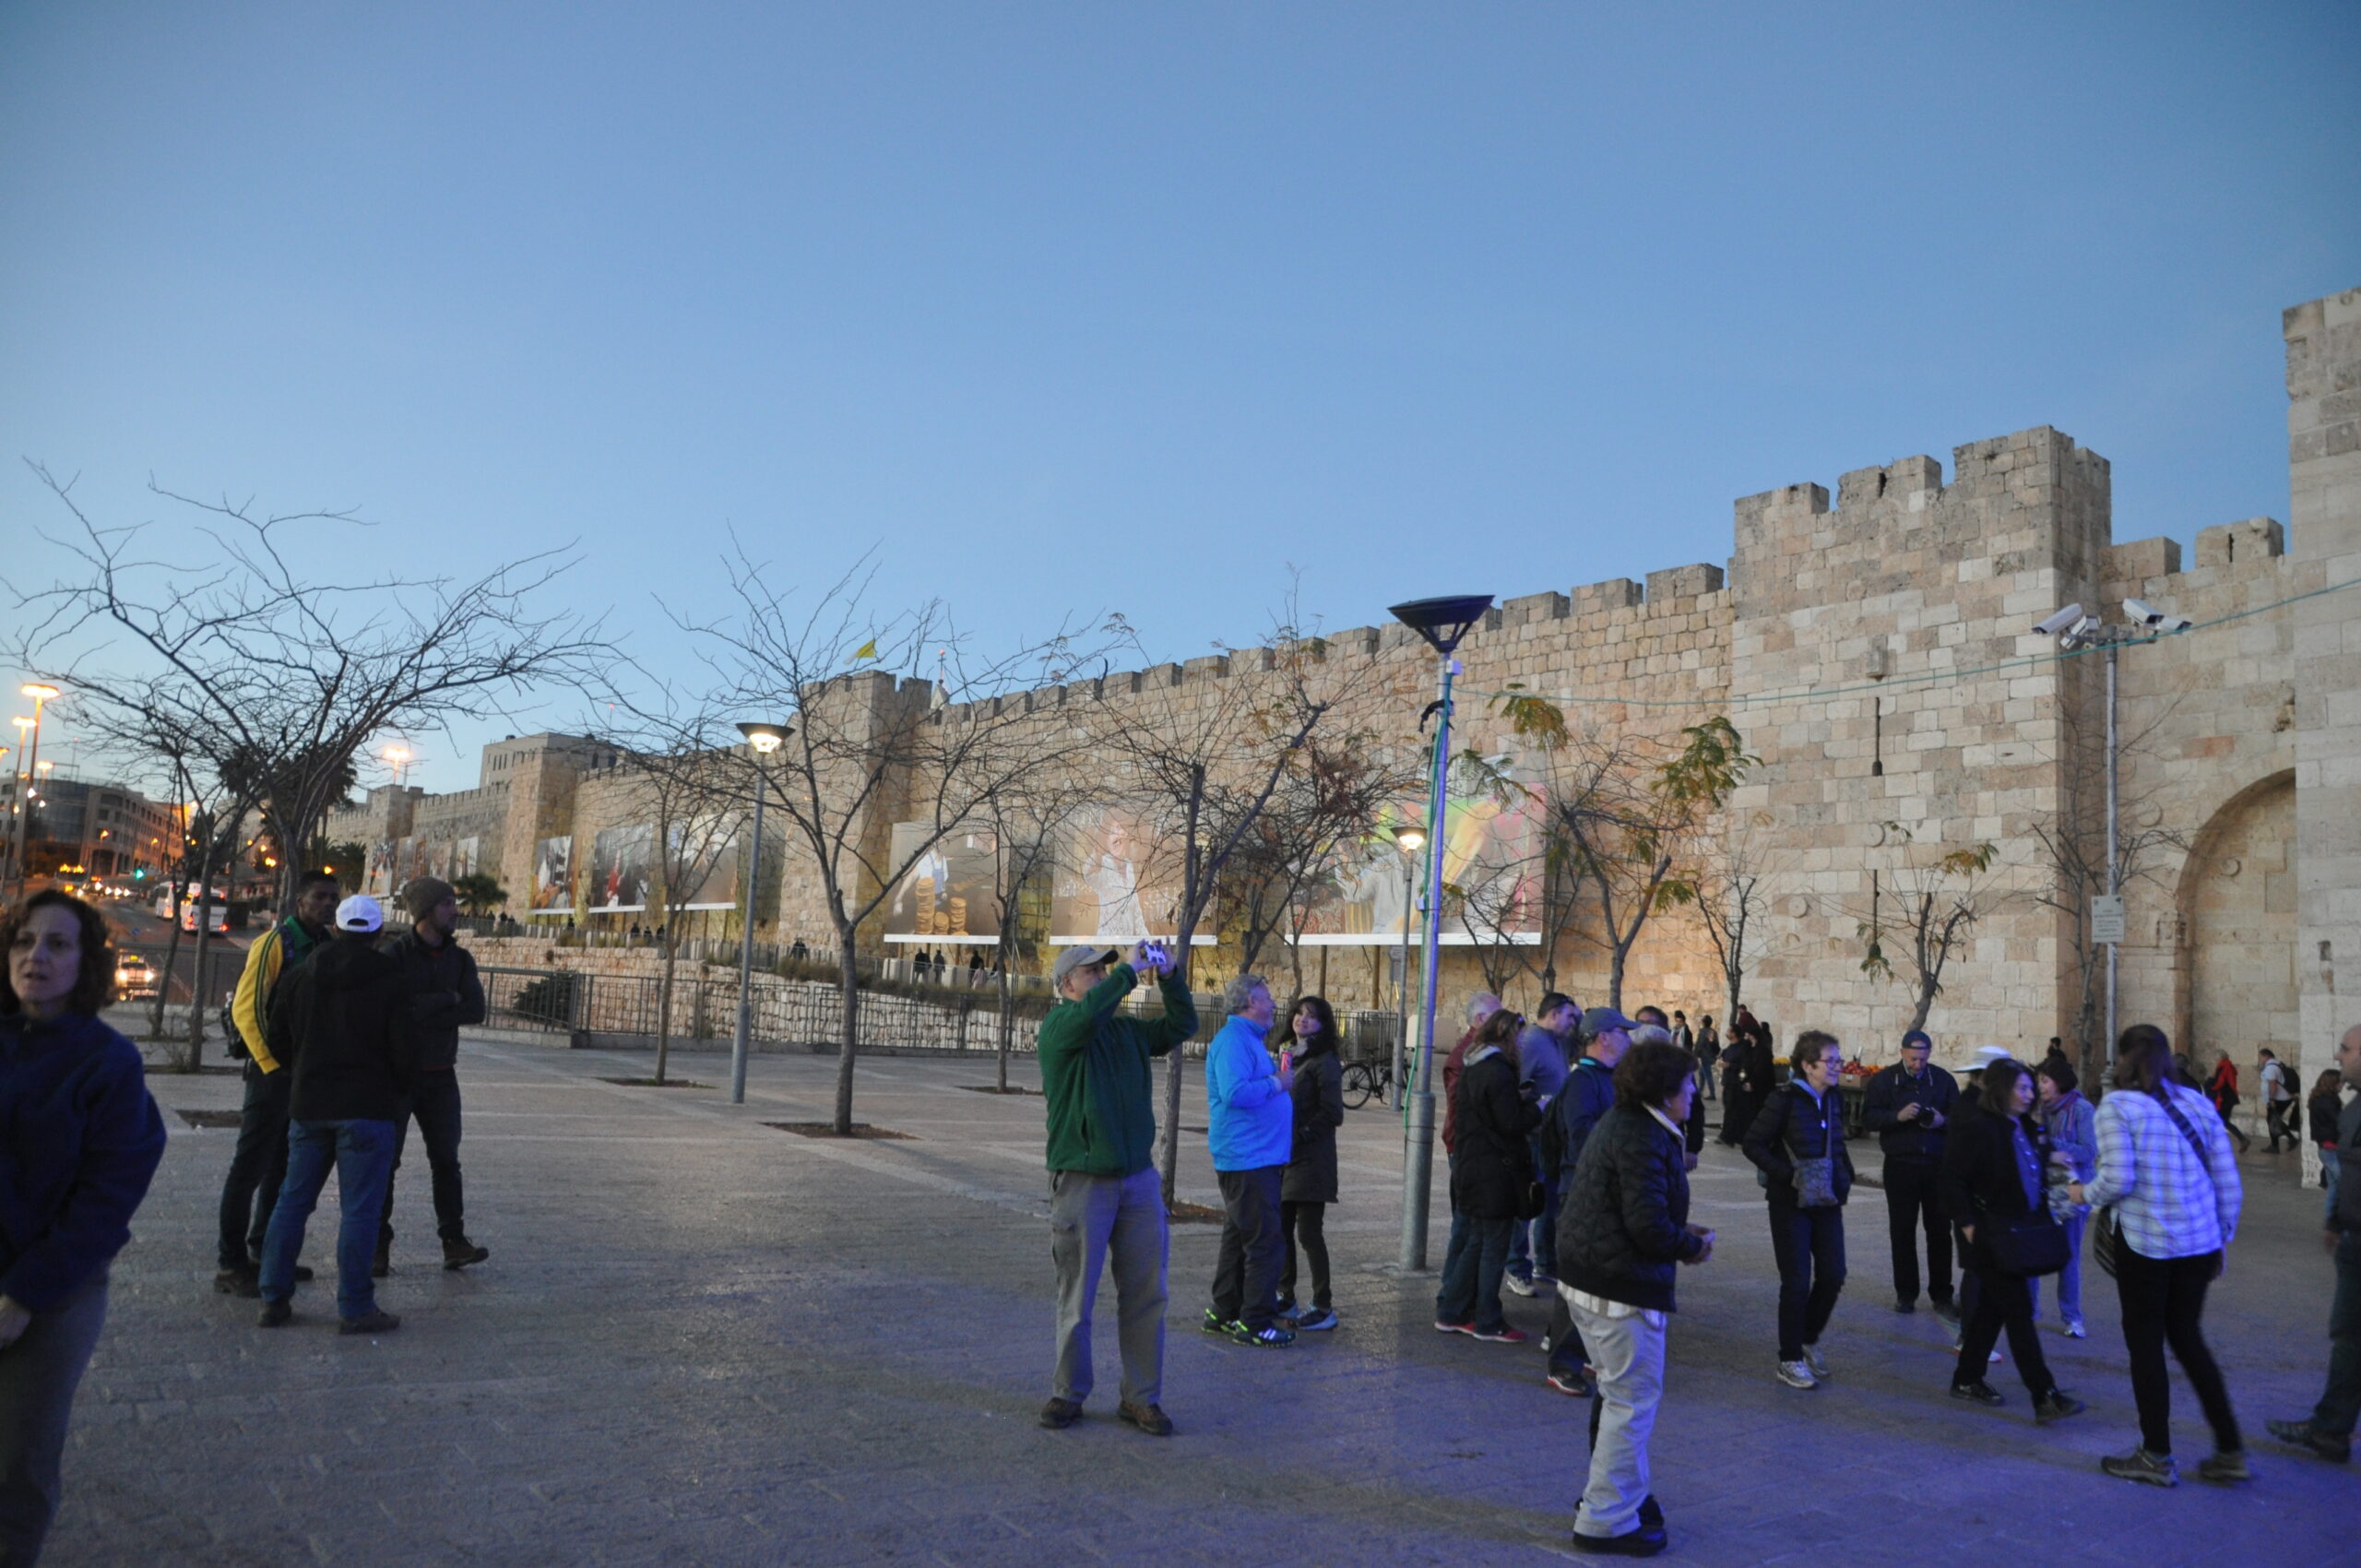 Temple trip outside the Old Jerusalem city walls